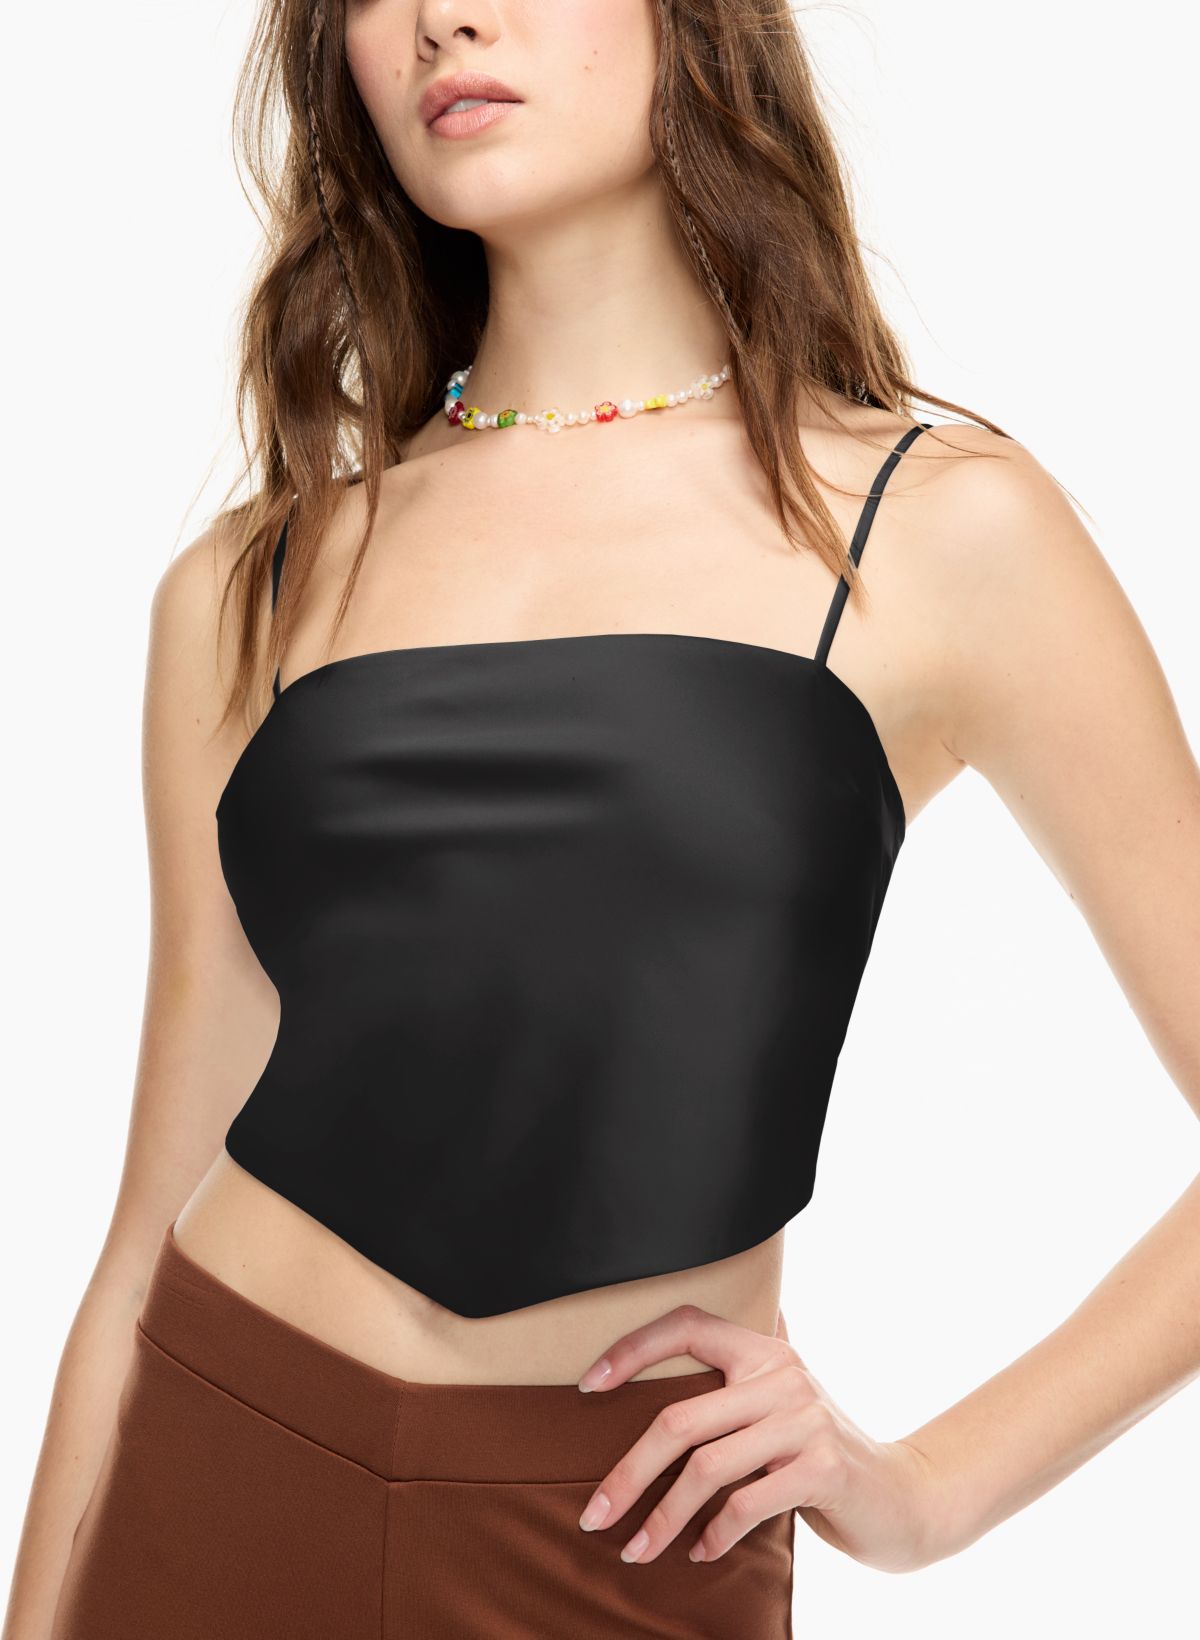 Sunday Sheer Camisole Top